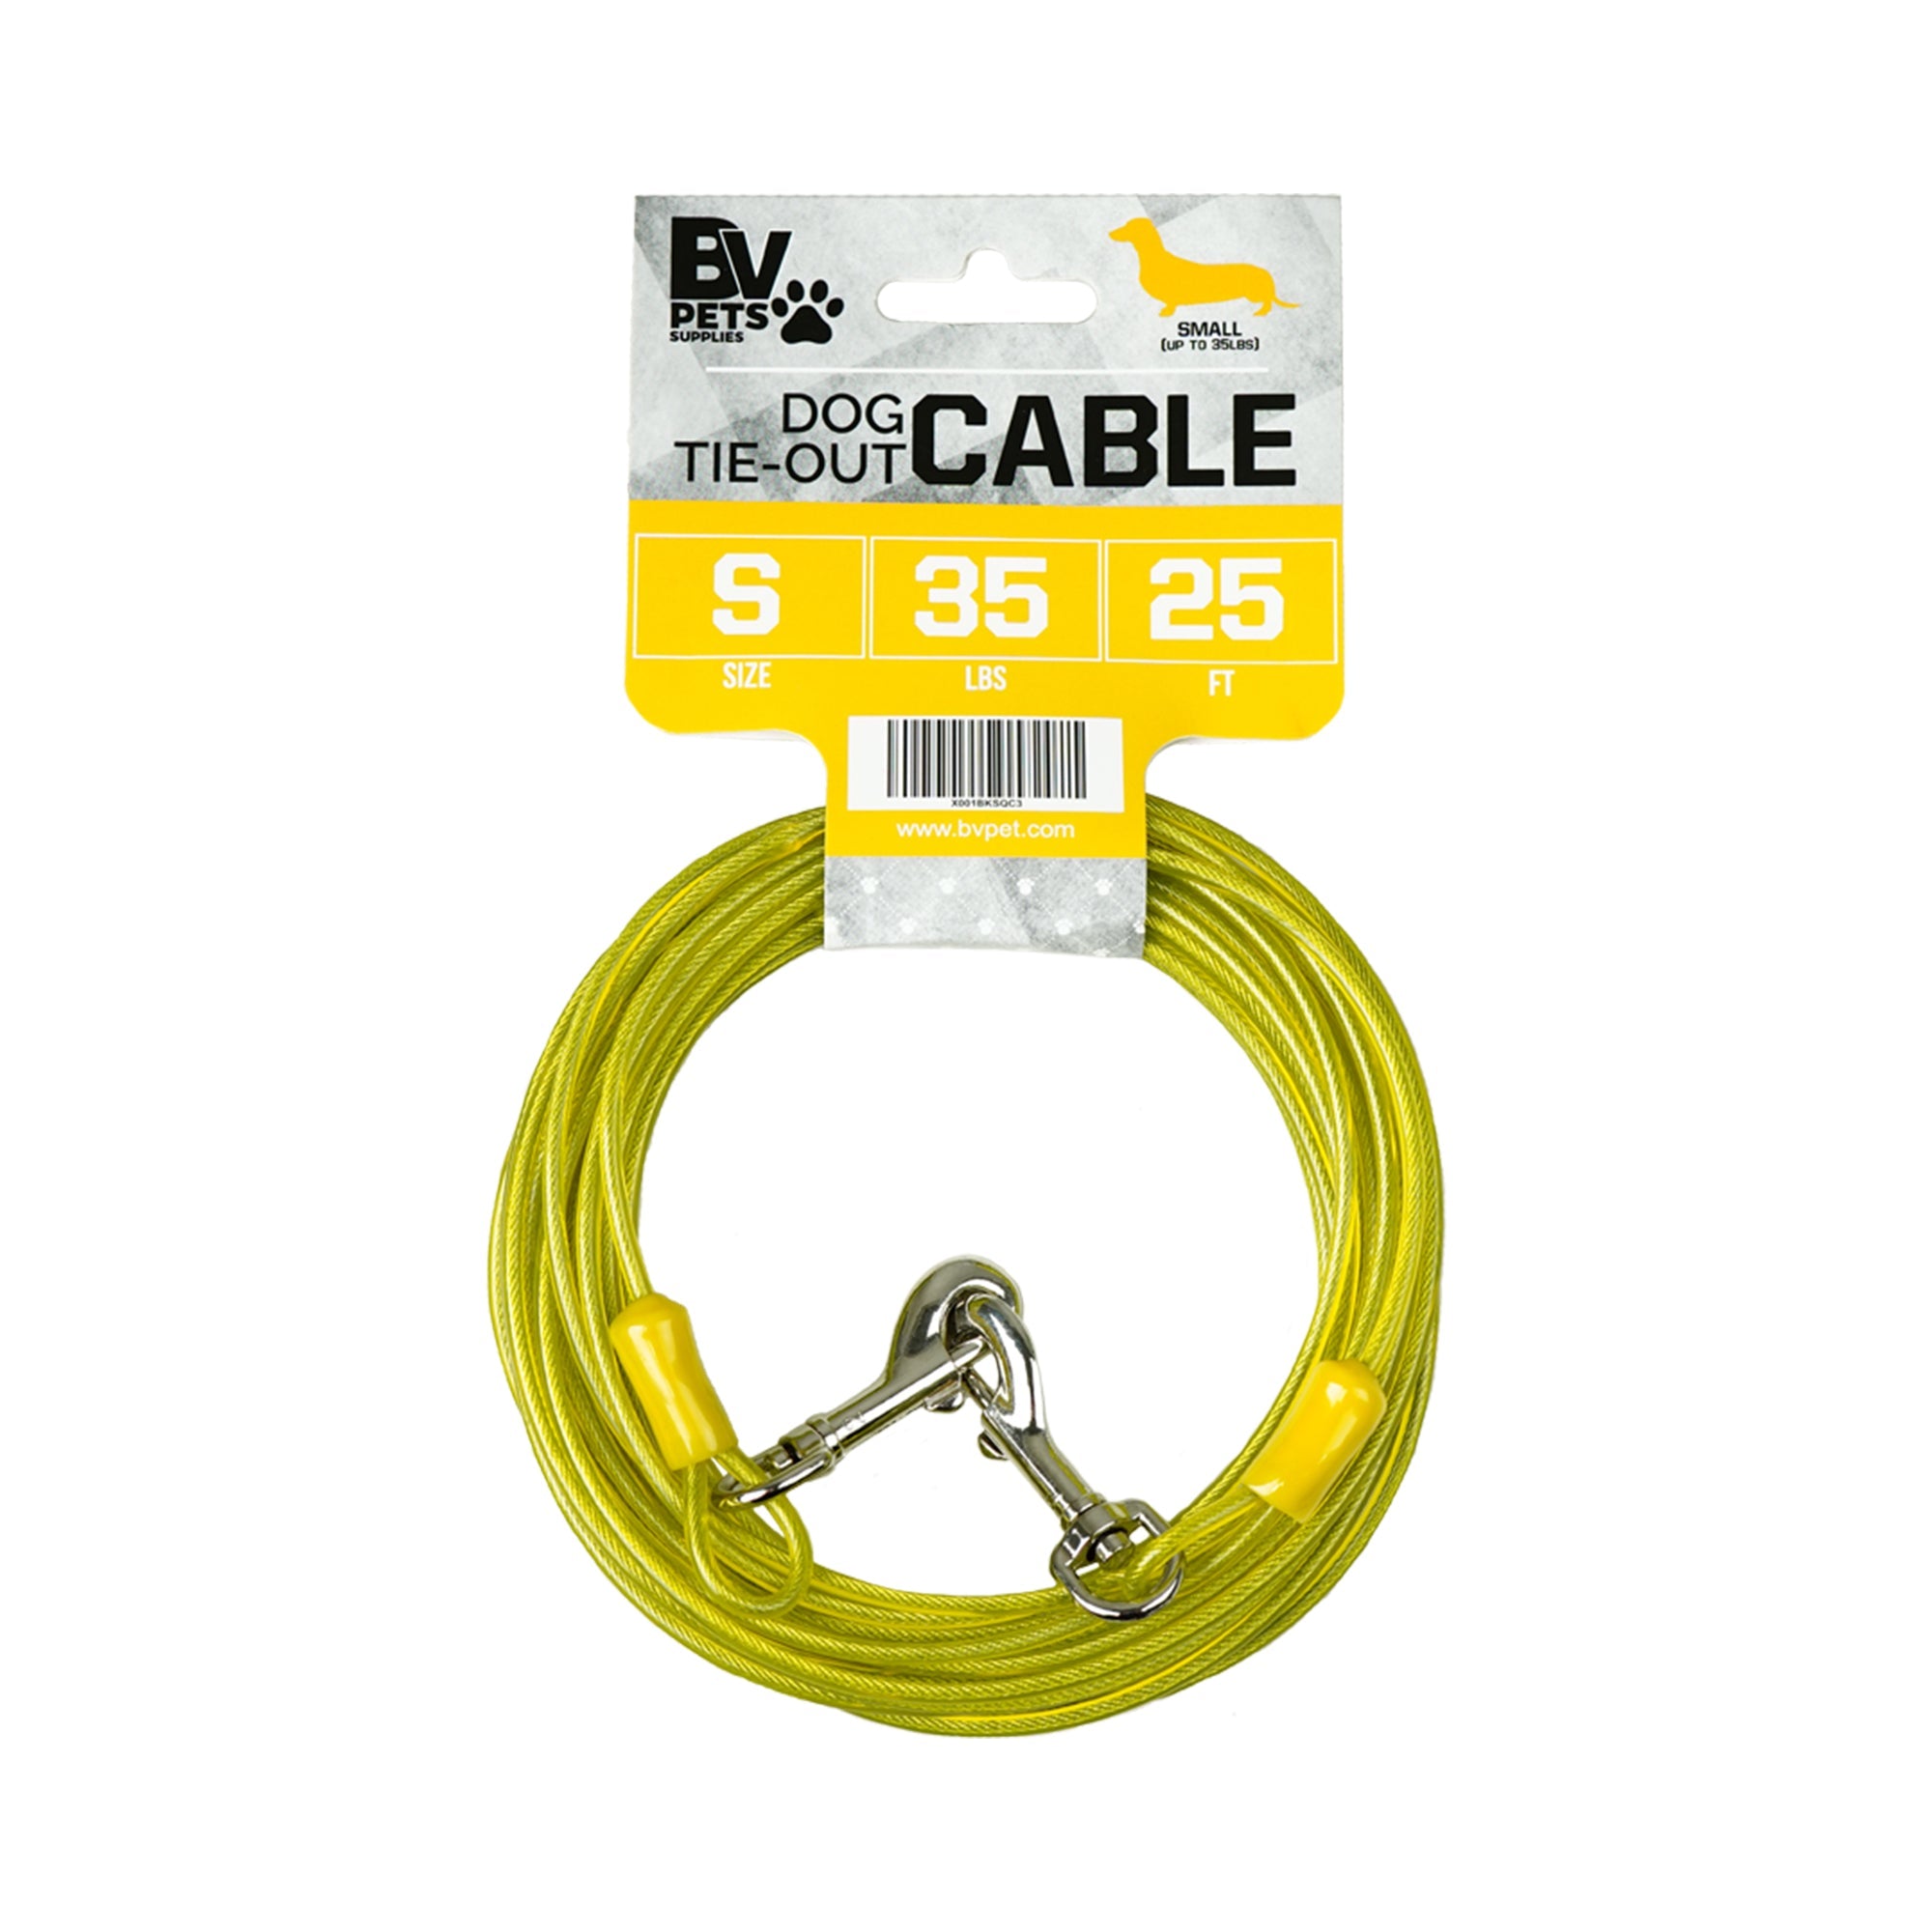 BV Pet Small Tie Out Cable - for Dogs up to 35Lbs, 25ft